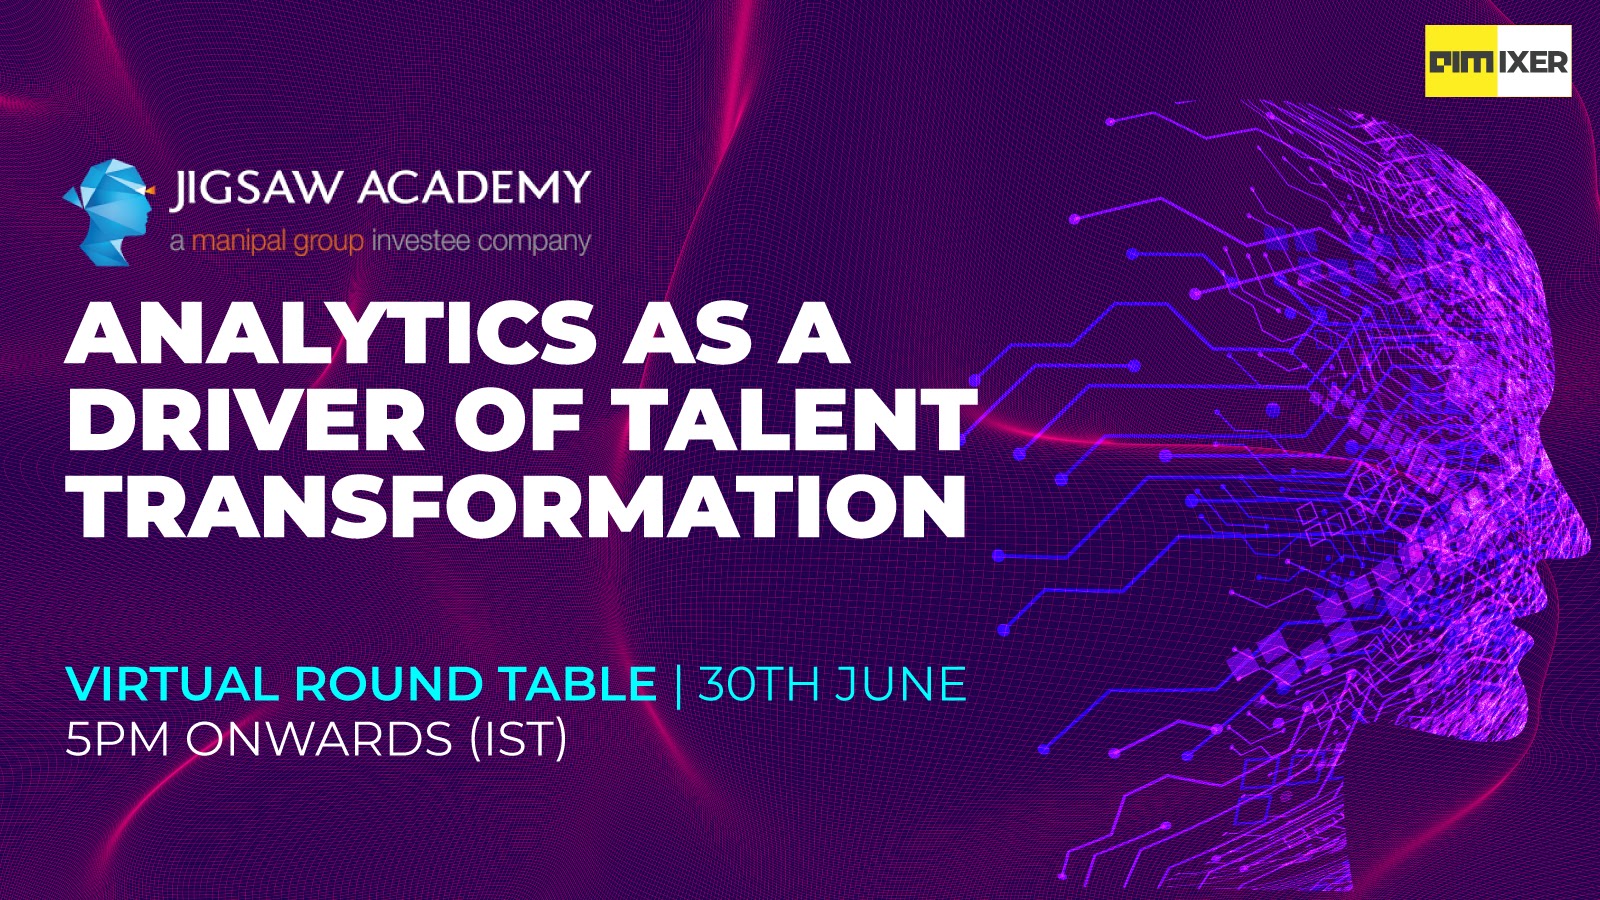 Register For A Virtual Round Table Discussion On Analytics As A Driver Of Talent Transformation